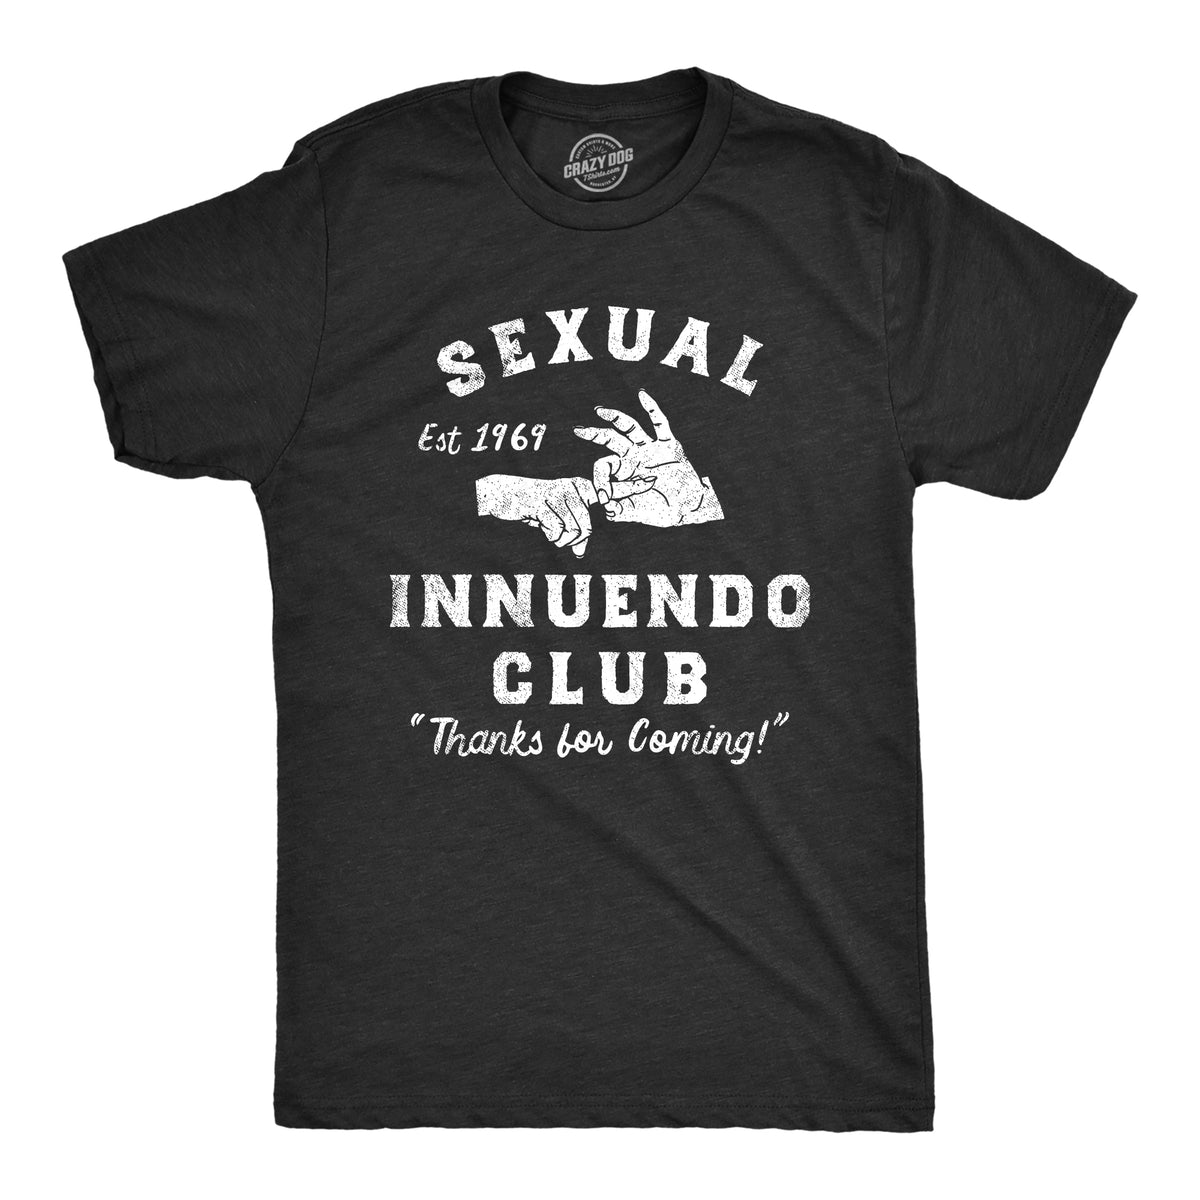 Funny Heather Black - INNUENDO Sexual Innuendo Club Thanks For Coming Mens T Shirt Nerdy Sex Tee